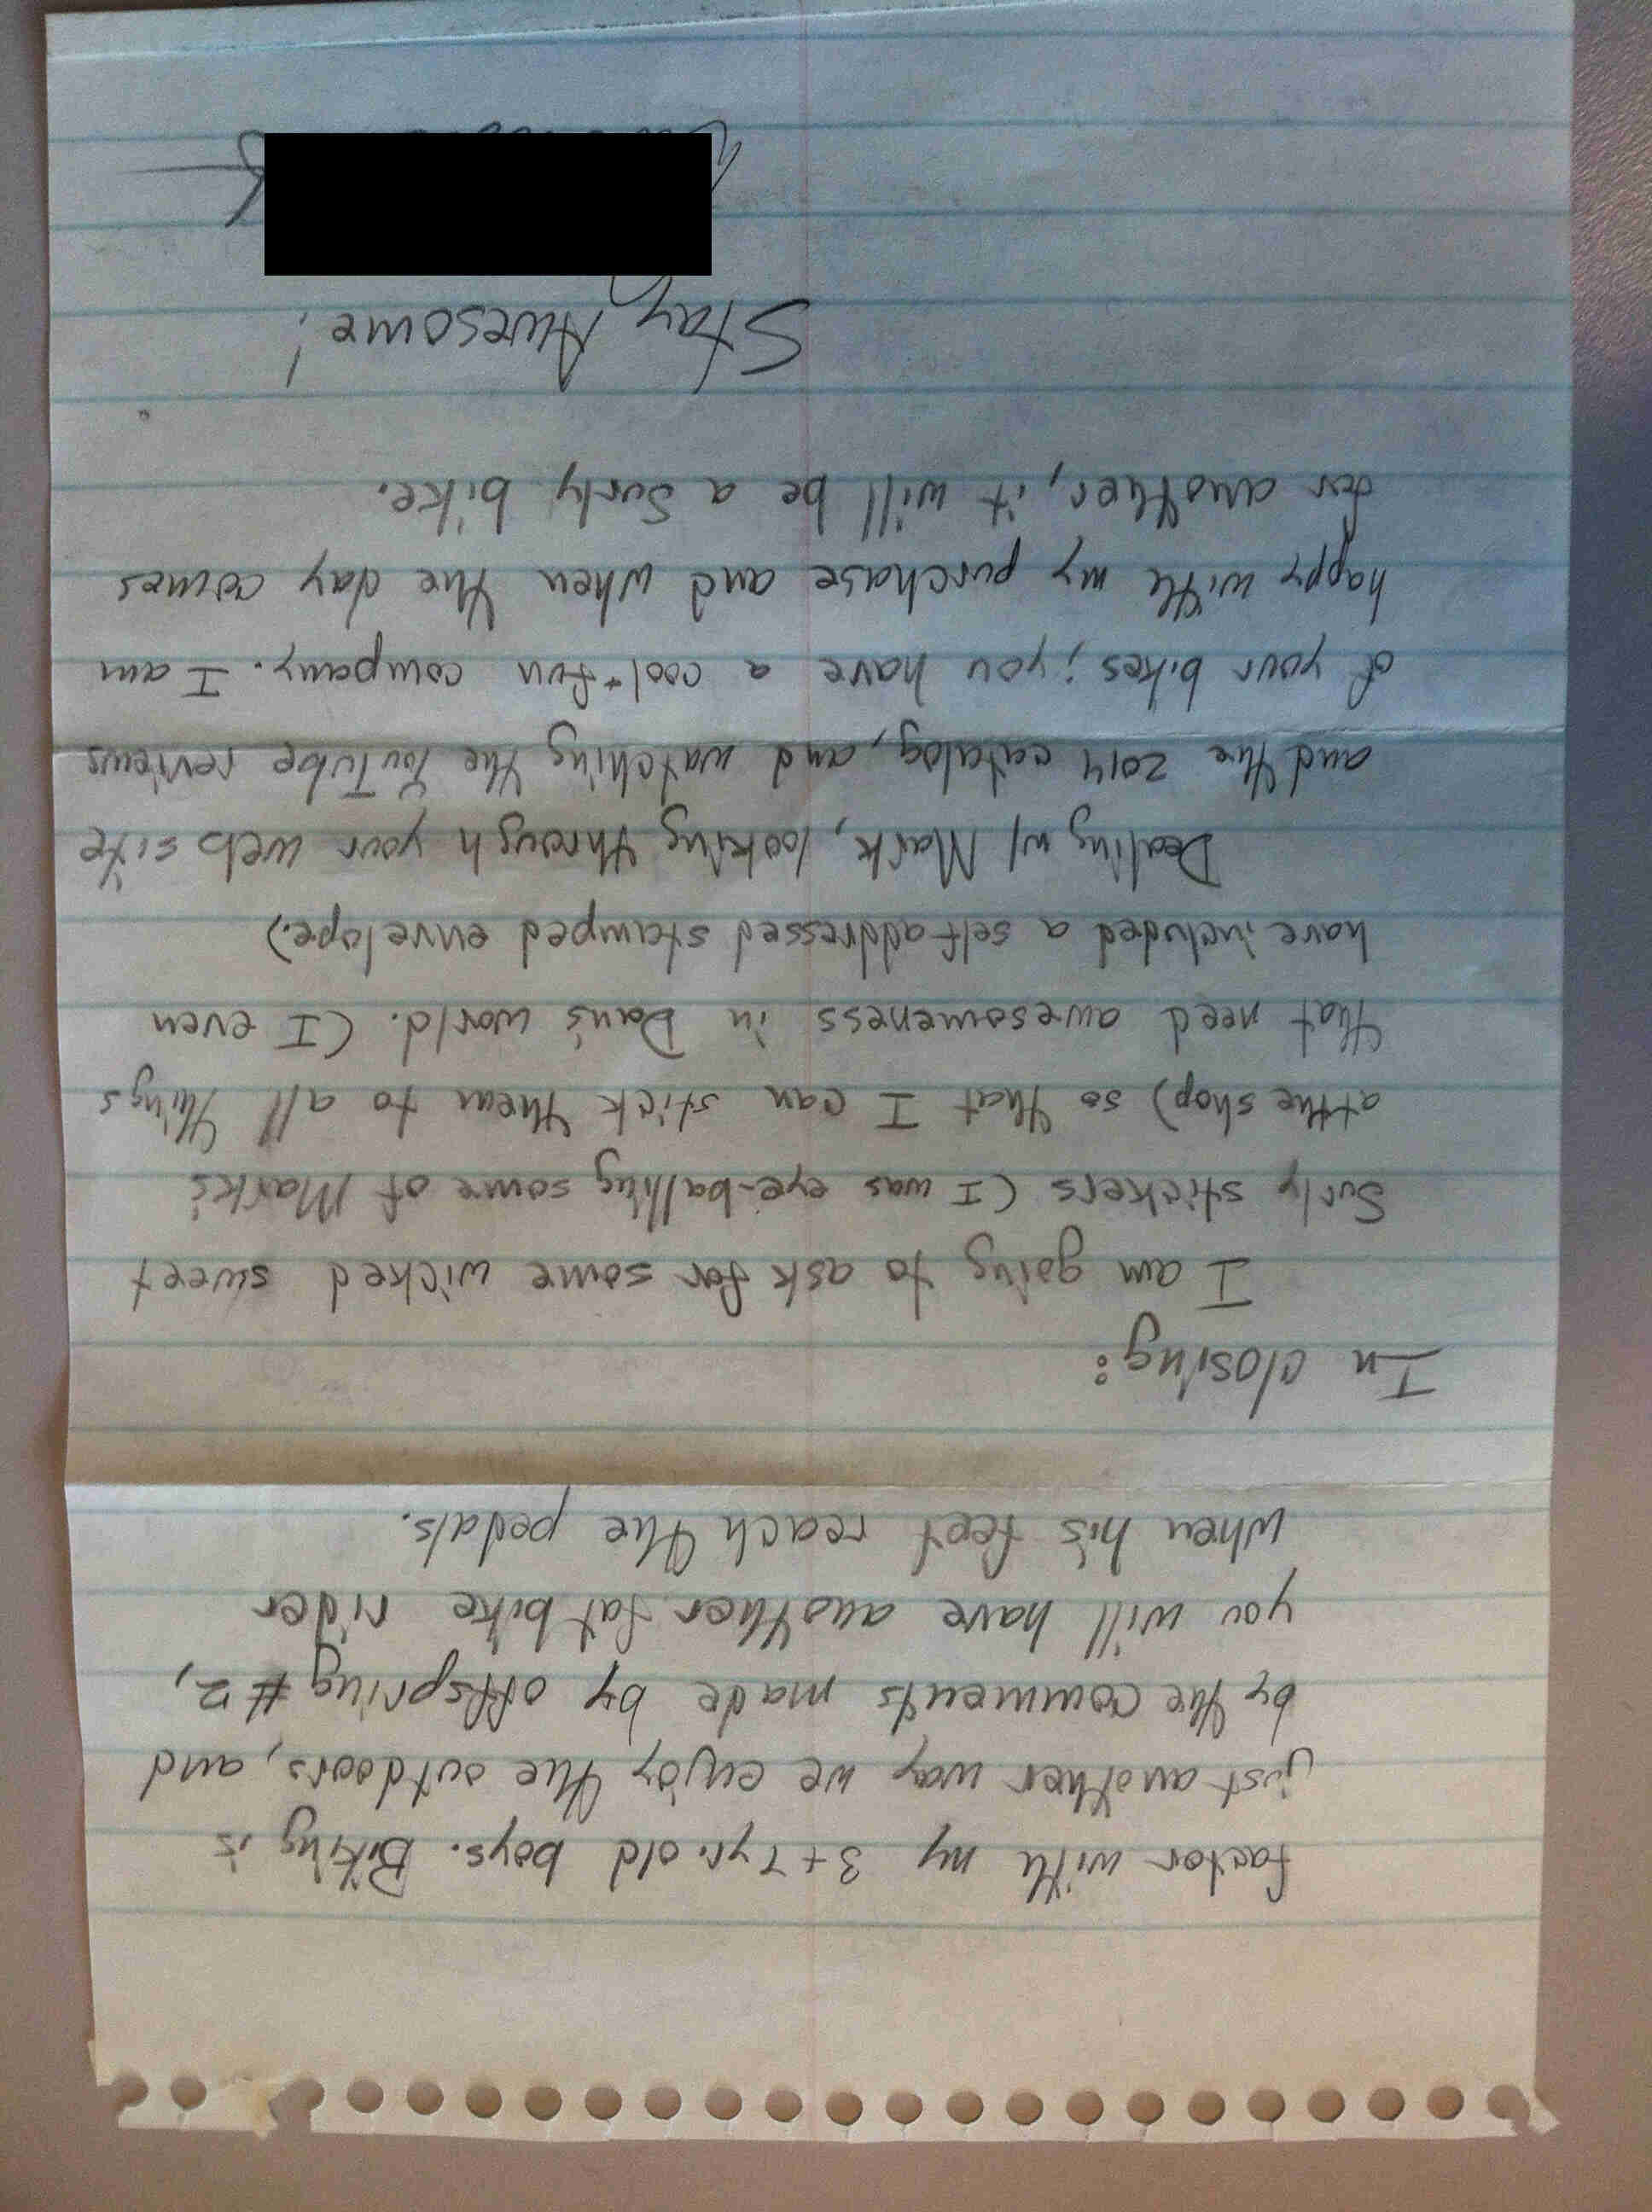 A upside down view of the back page of a letter, written on notebook paper in black pen